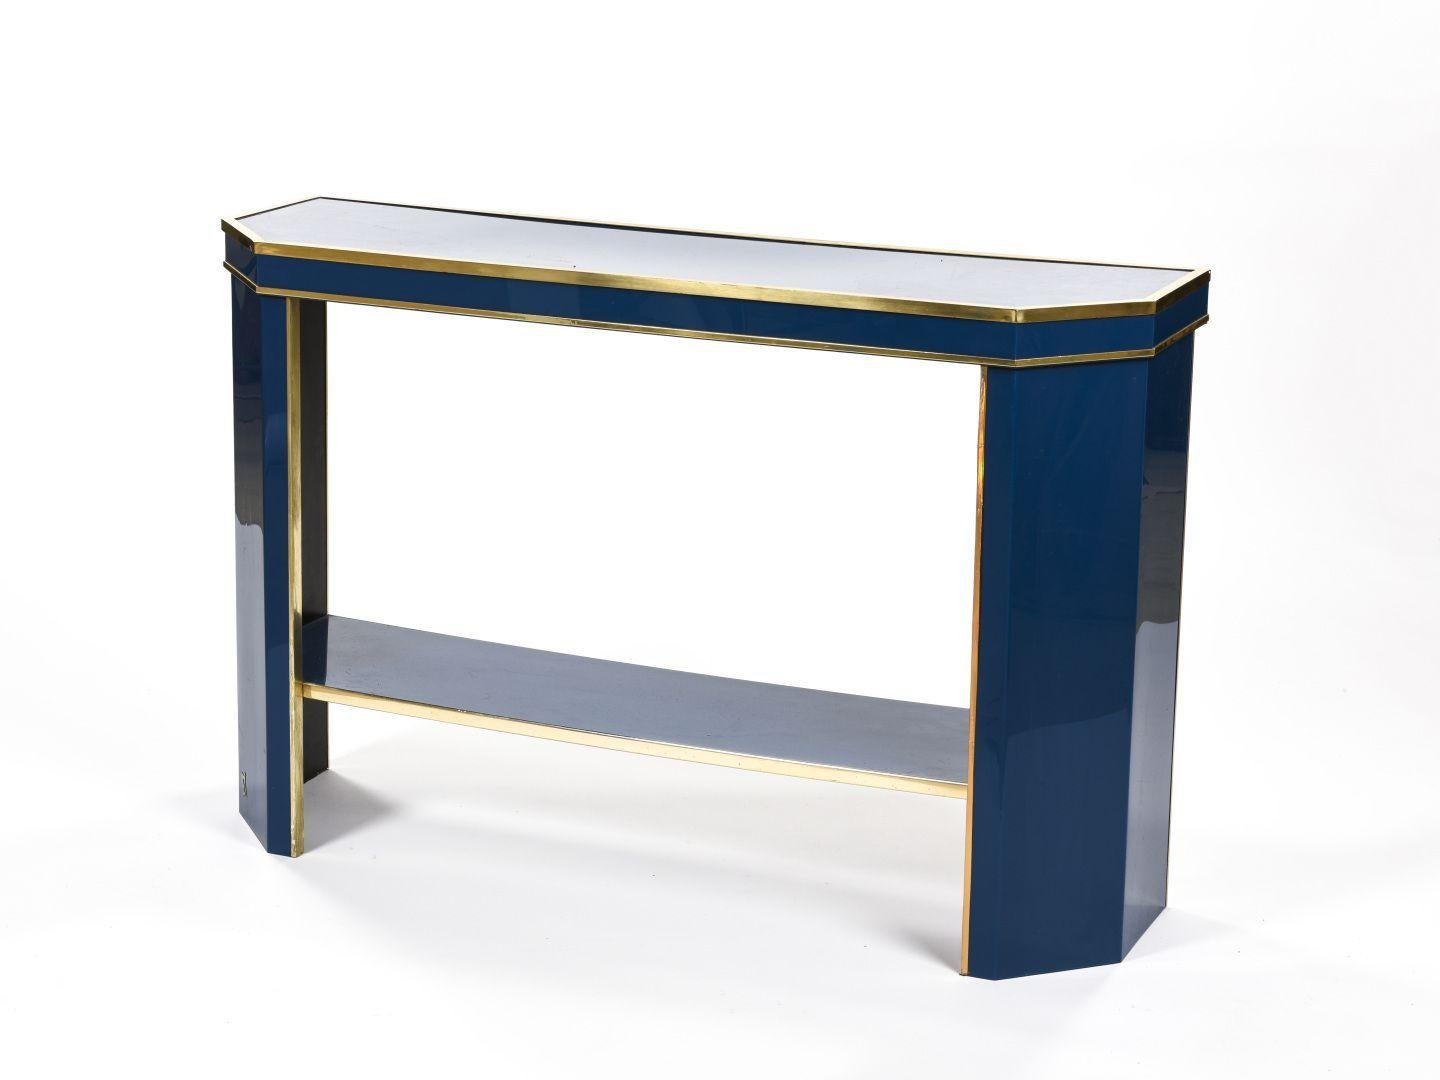 Jean Claude Mahey, French artist born in 1944. 

Console with double shelves in blue lacquer with gilt brass frame.
circa 1975
Monogrammed 
Measures: Height 78 cm, length 121 cm, depth 36 cm

Good condition.